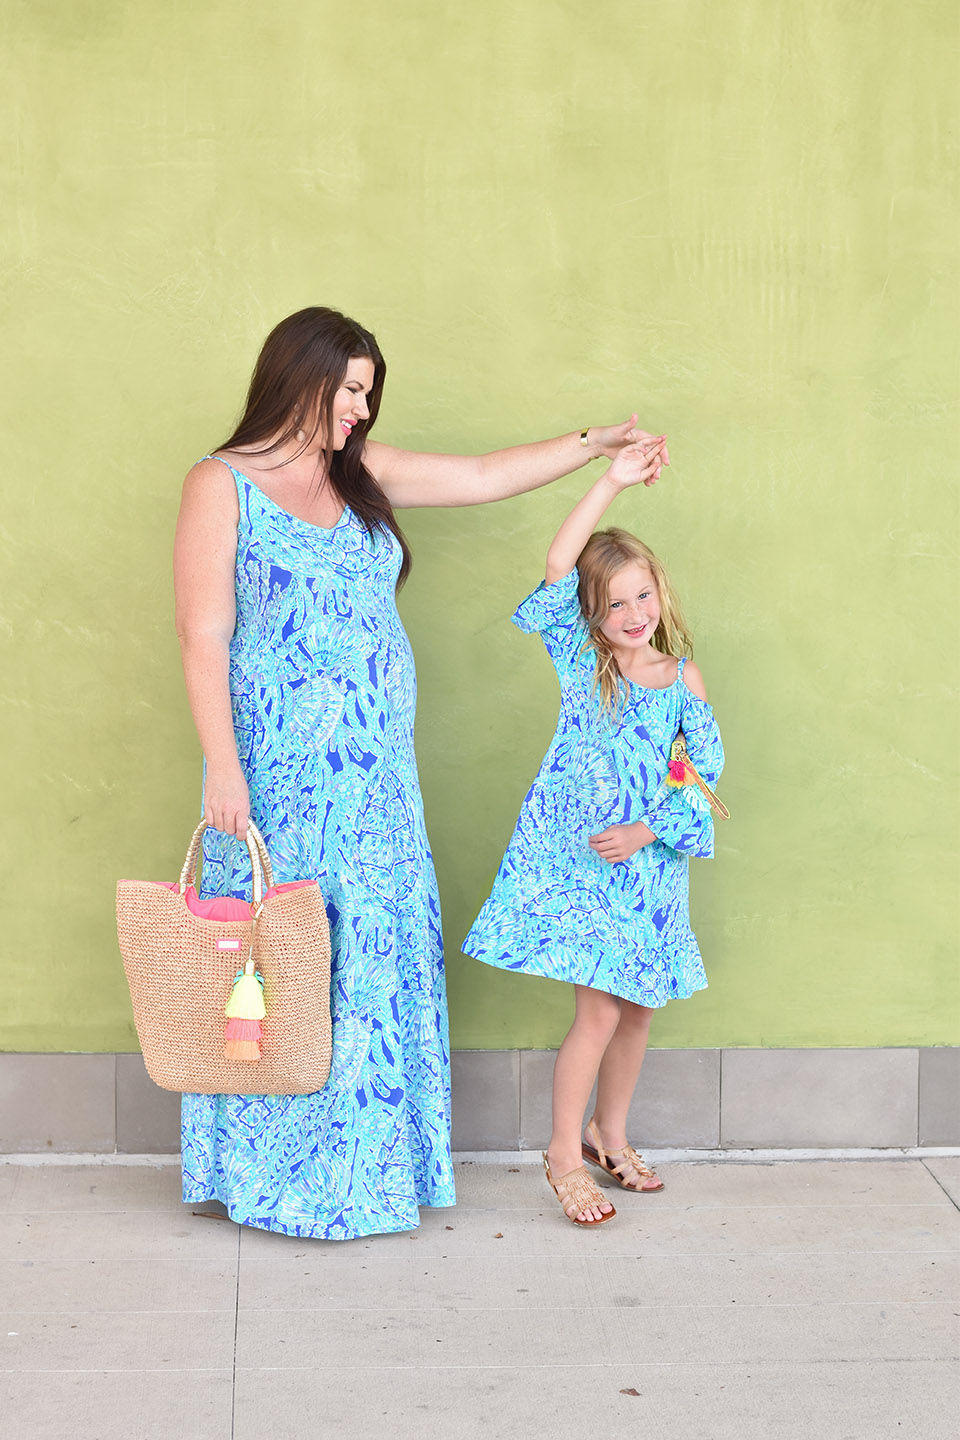 Jami Ray Grand Boulevard Lilly Pulitzer Allair Maxi Dress Mommy and Me